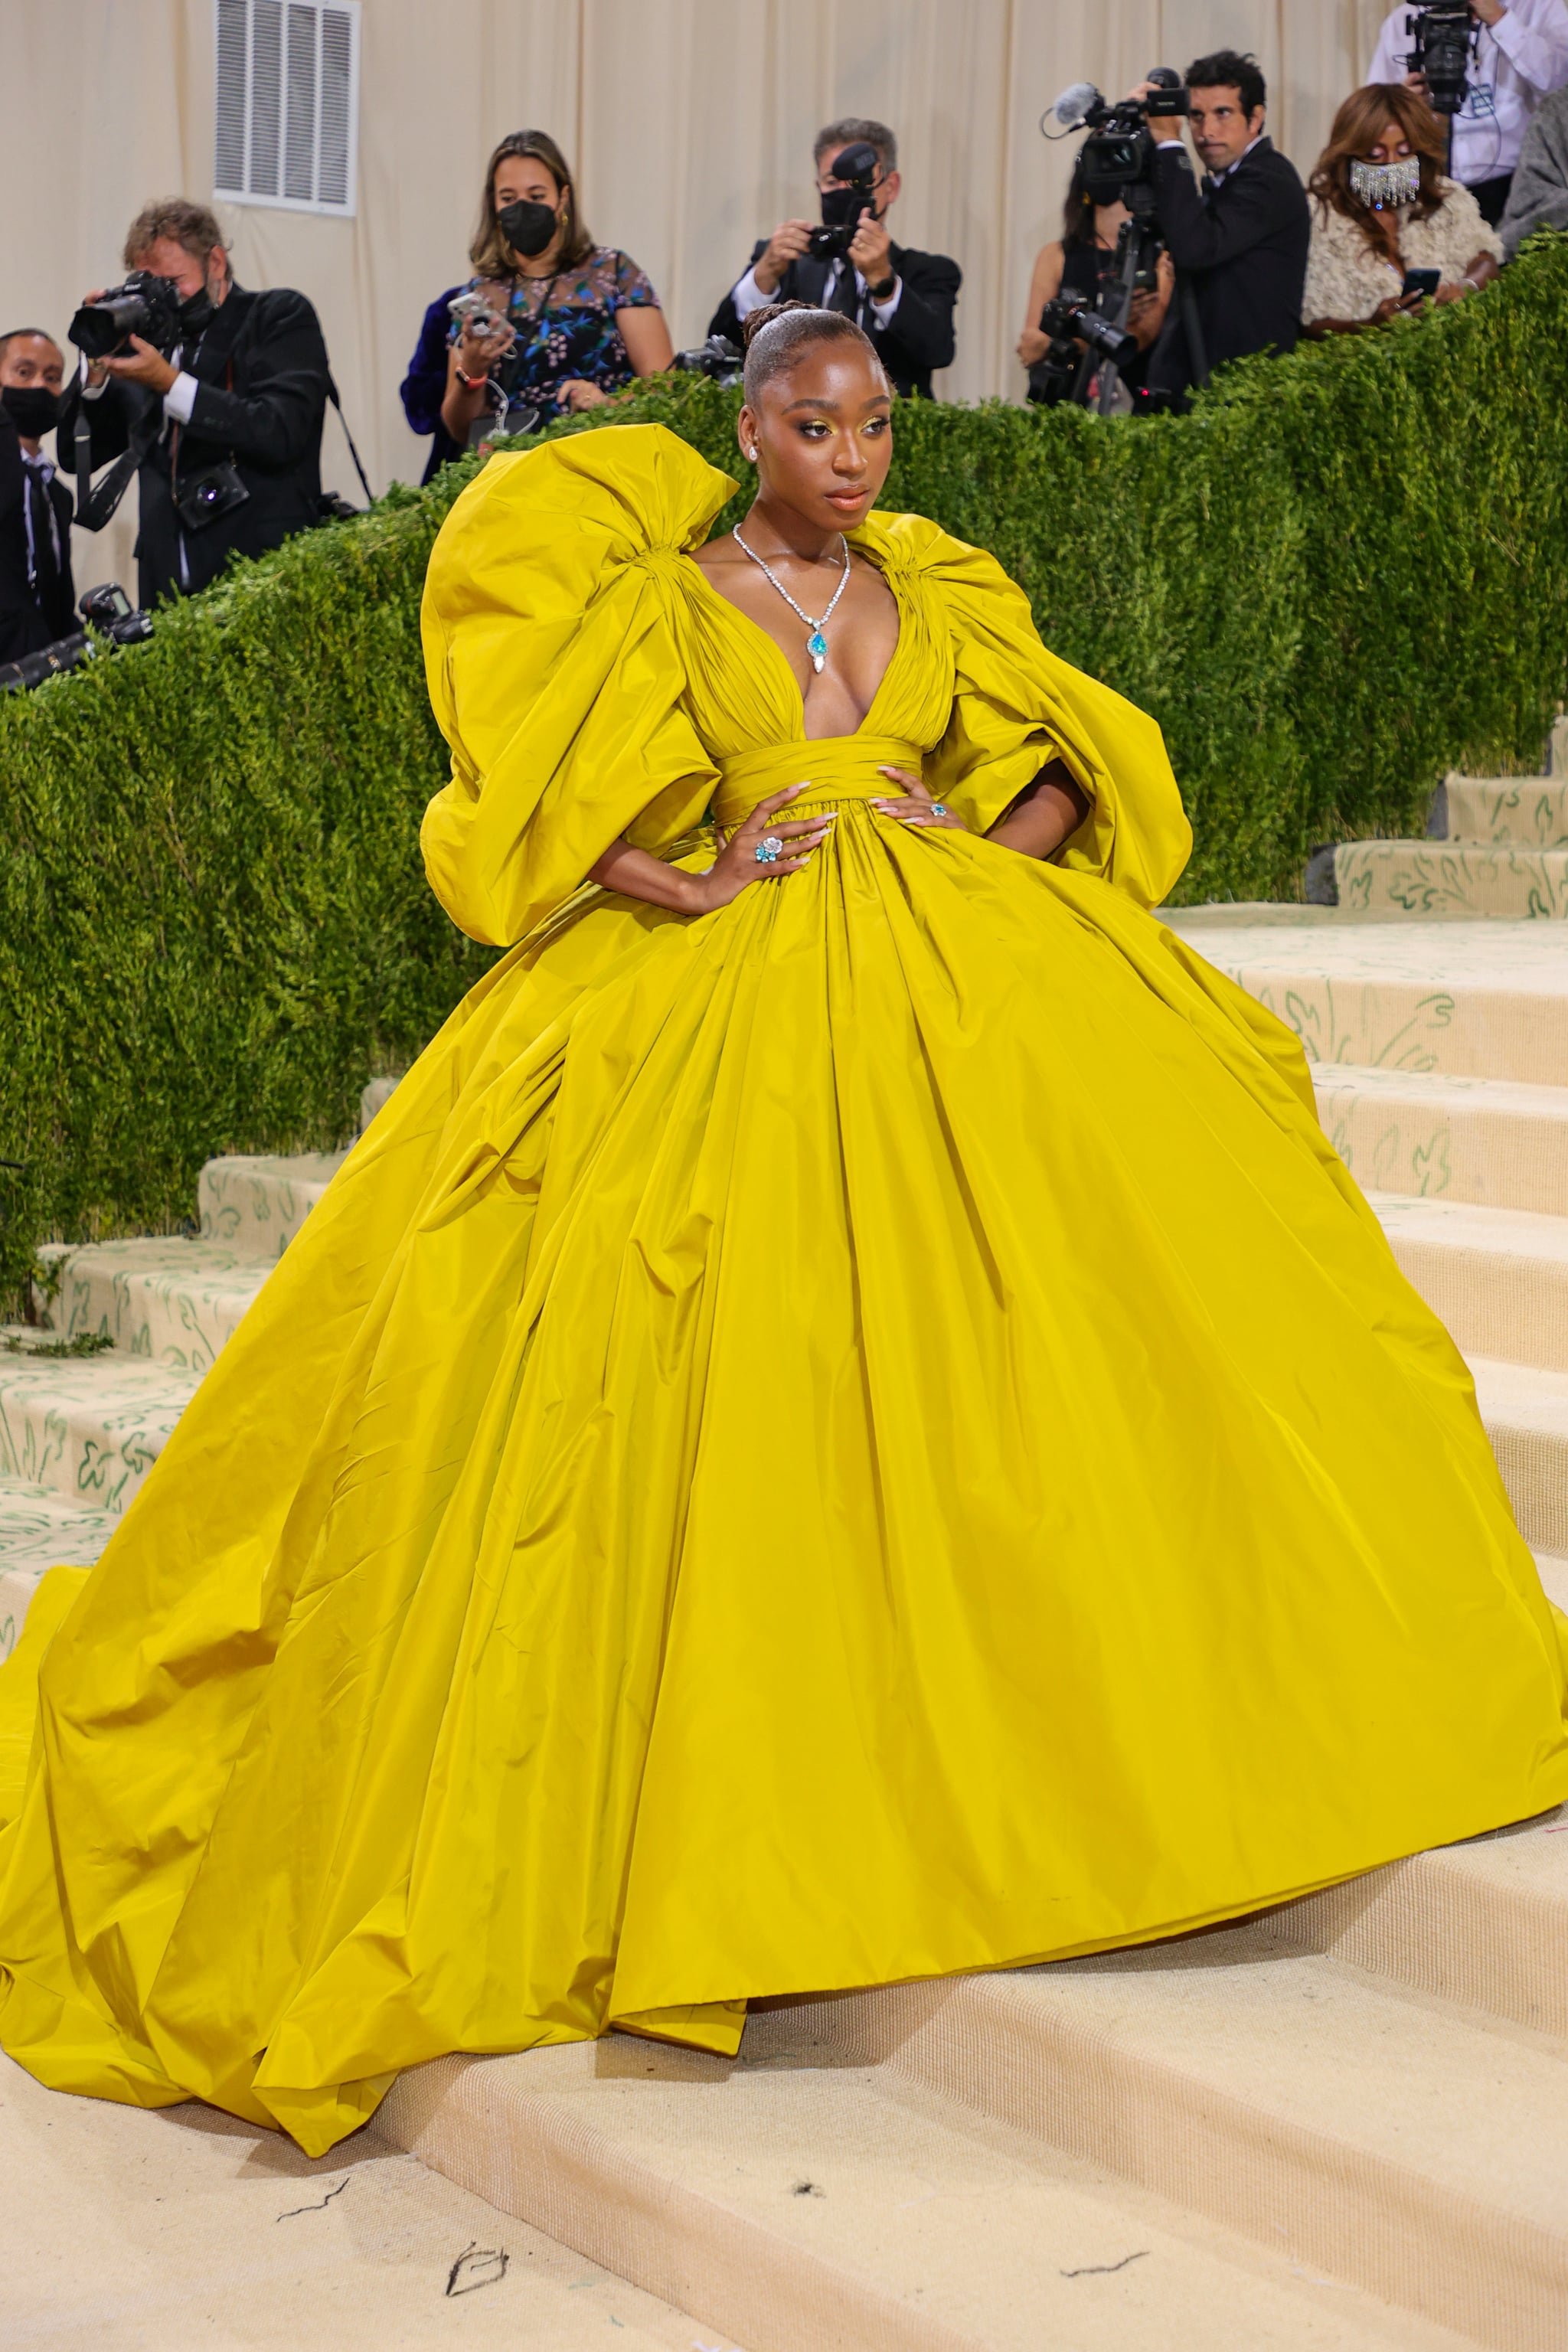 Fashion, Shopping & | Normani Knows Color and Went For It This Bright-Yellow, Voluminous Valentino Gown | POPSUGAR Fashion Photo 6